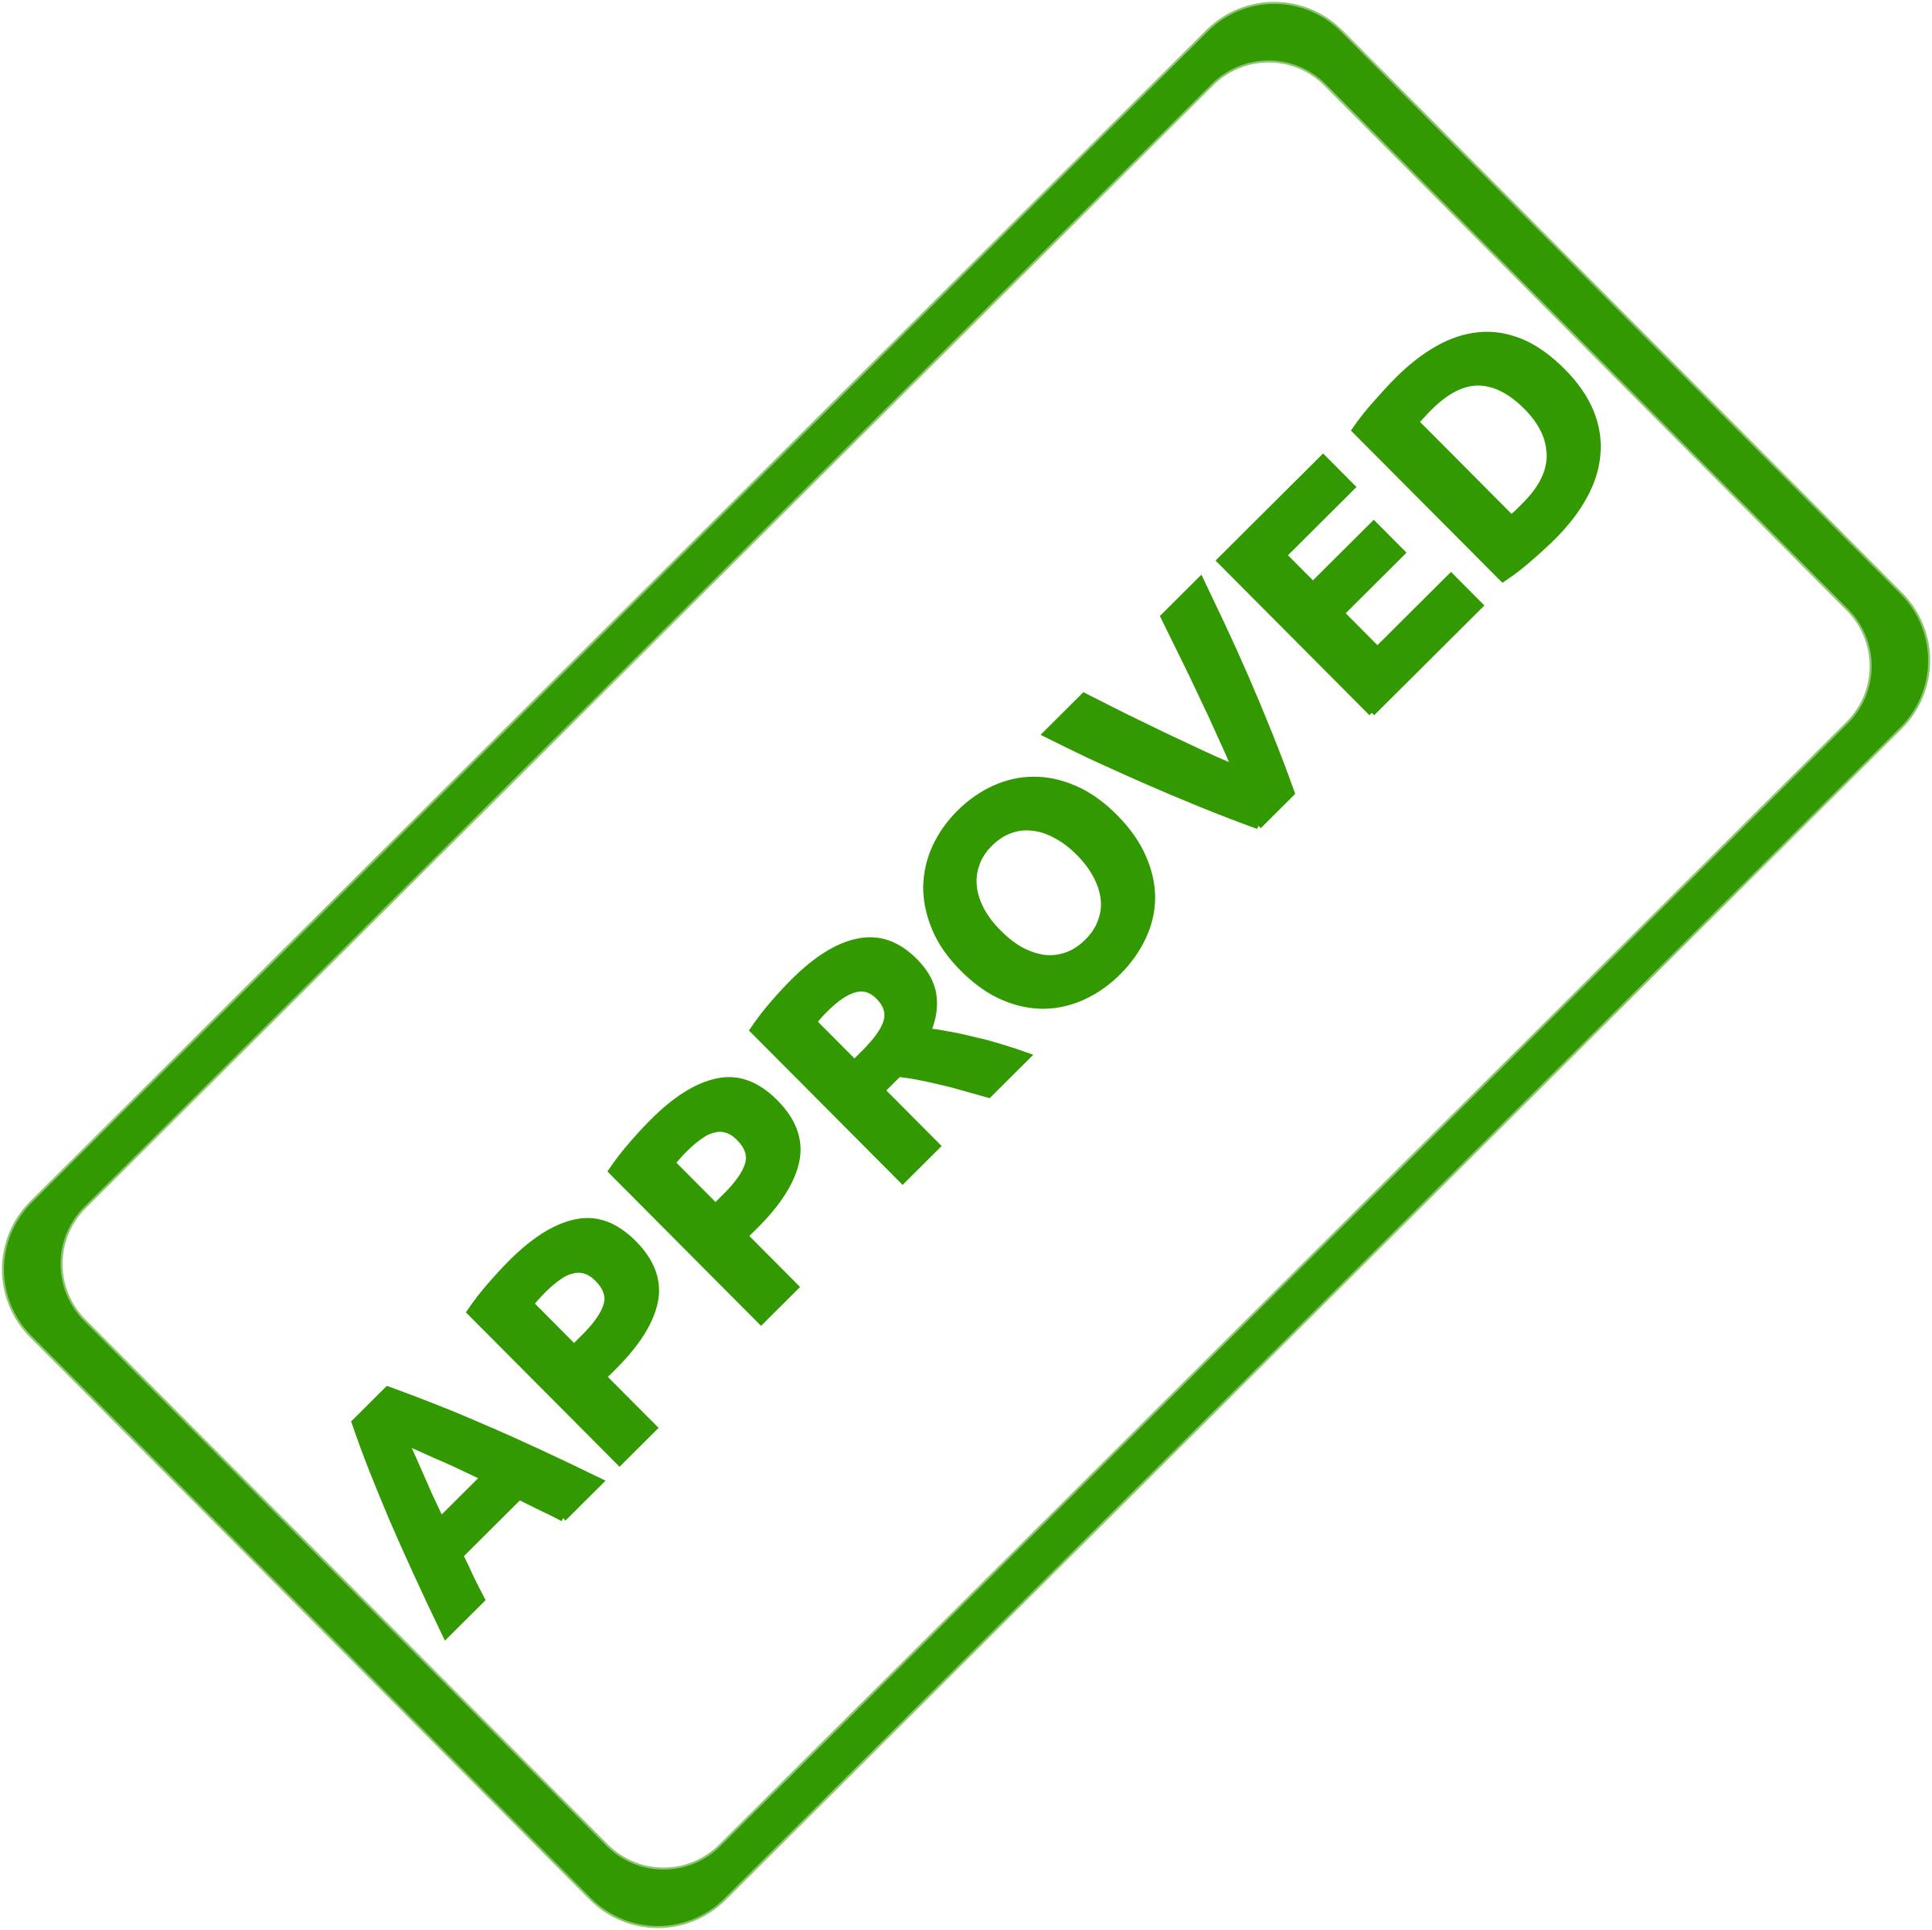 Approved Business Stamp 1 png